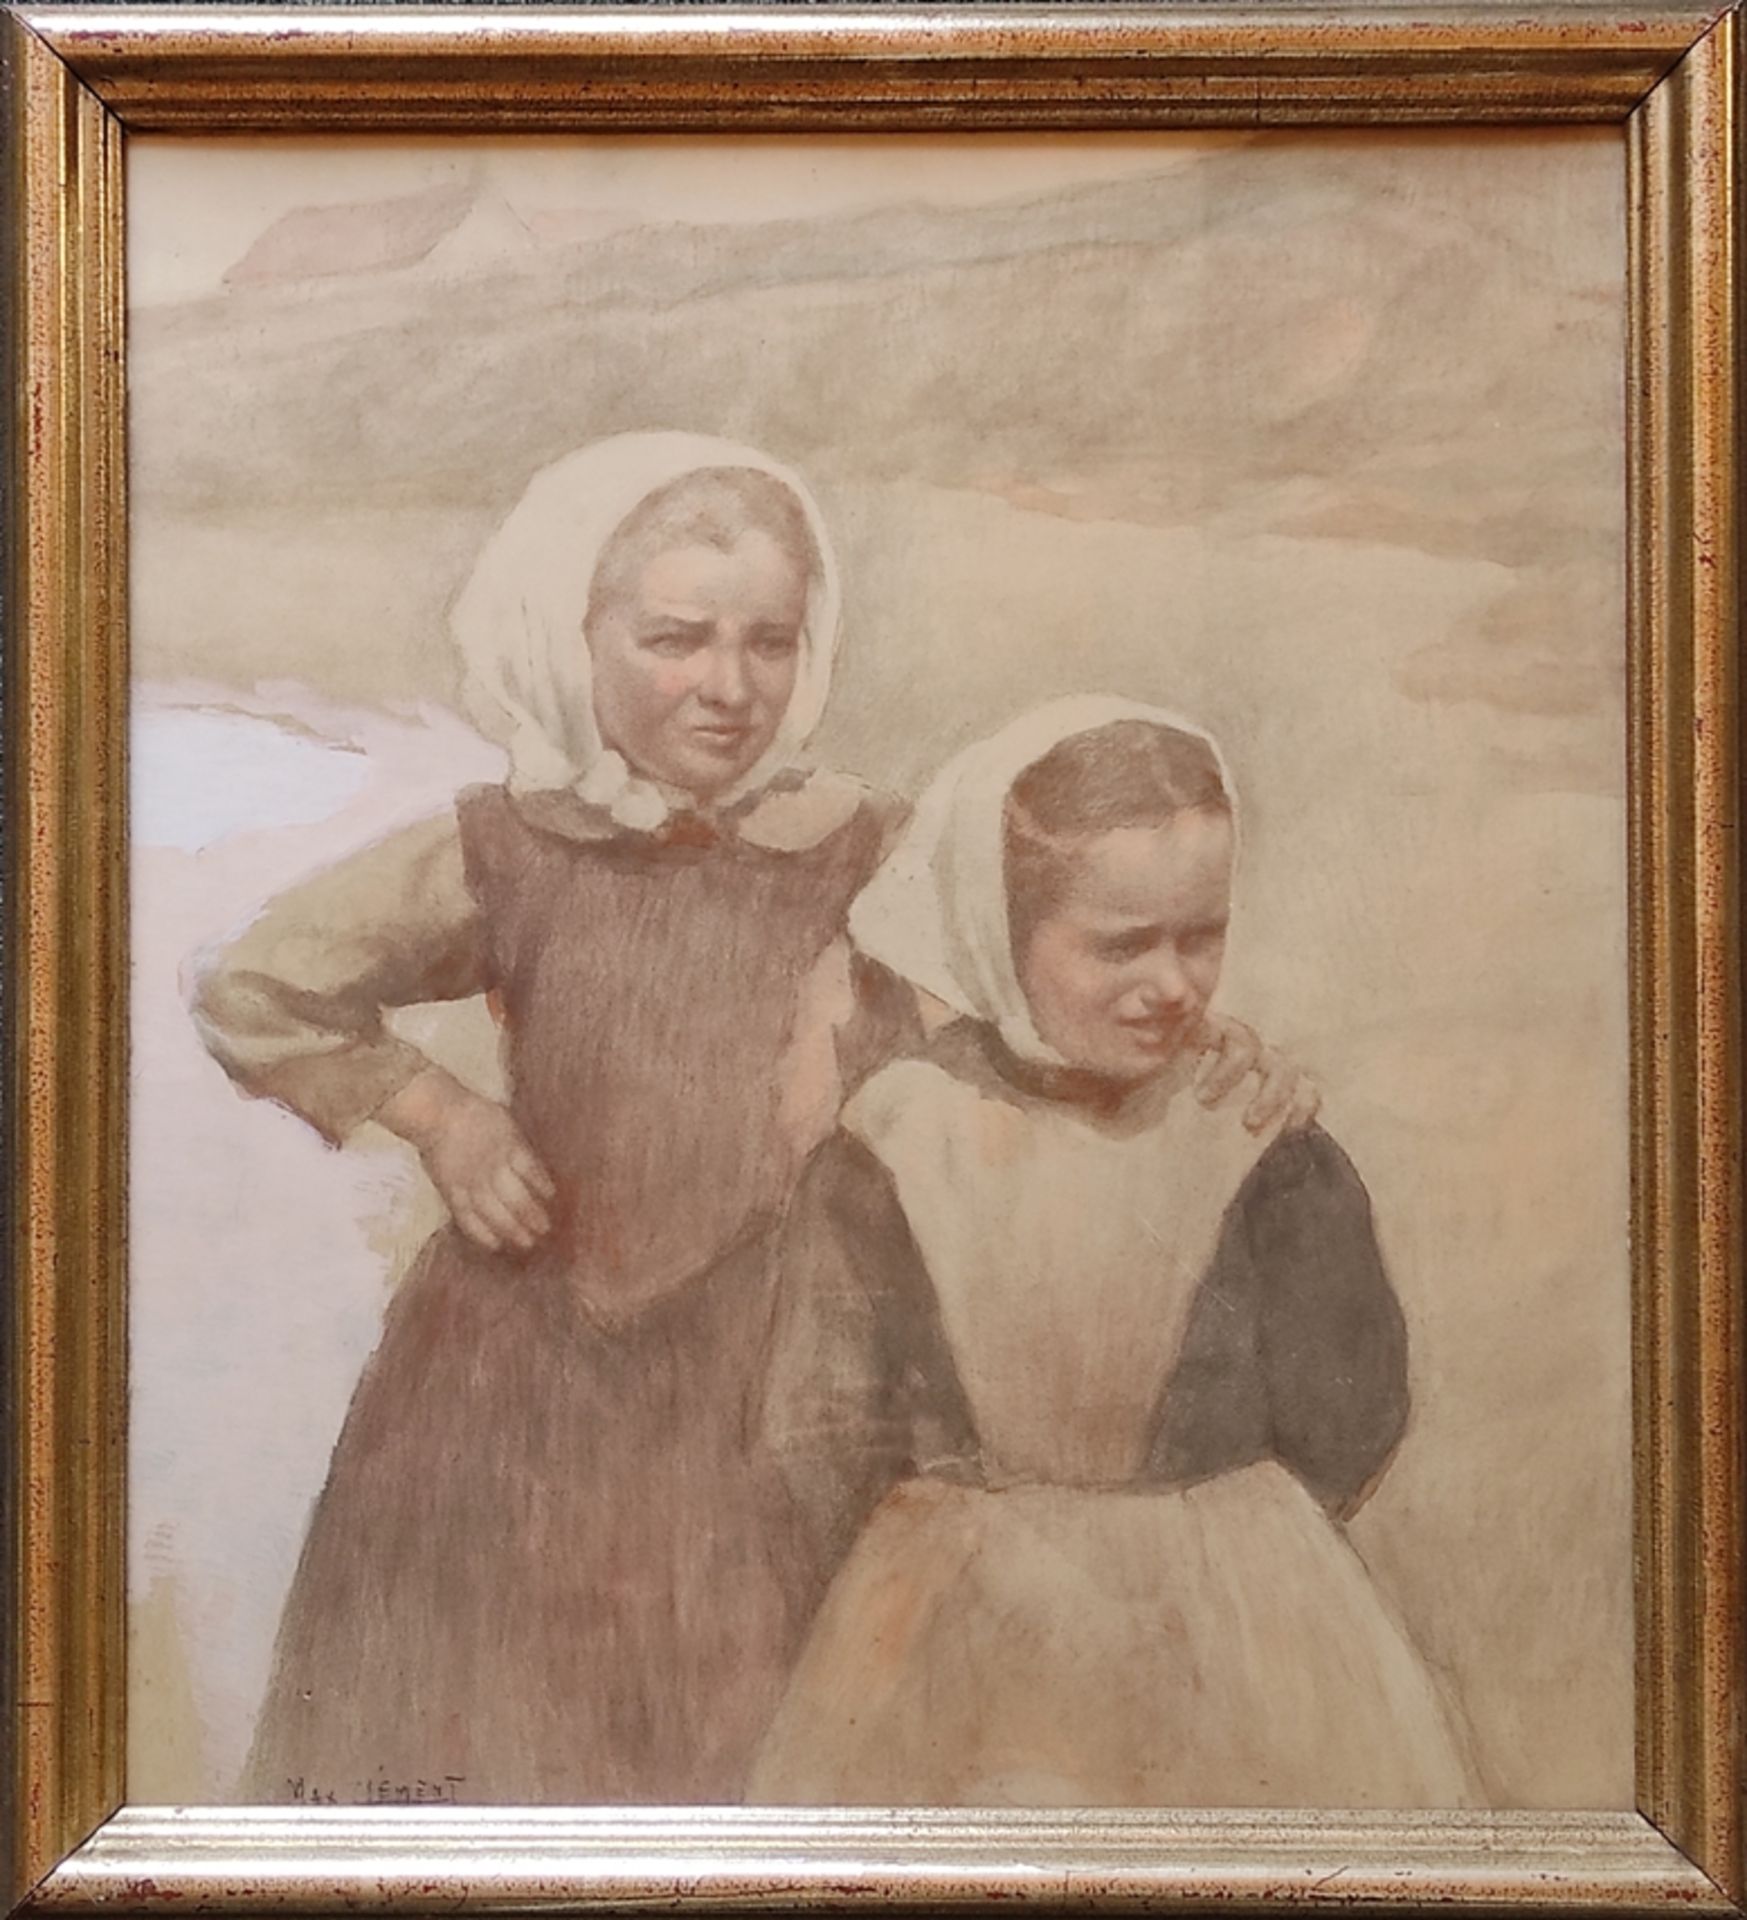 Clément, Max (1912 Wünnewil/Schmitten - 1995 Tafers) "Two girls with headscarf" in front of a mount - Image 2 of 3